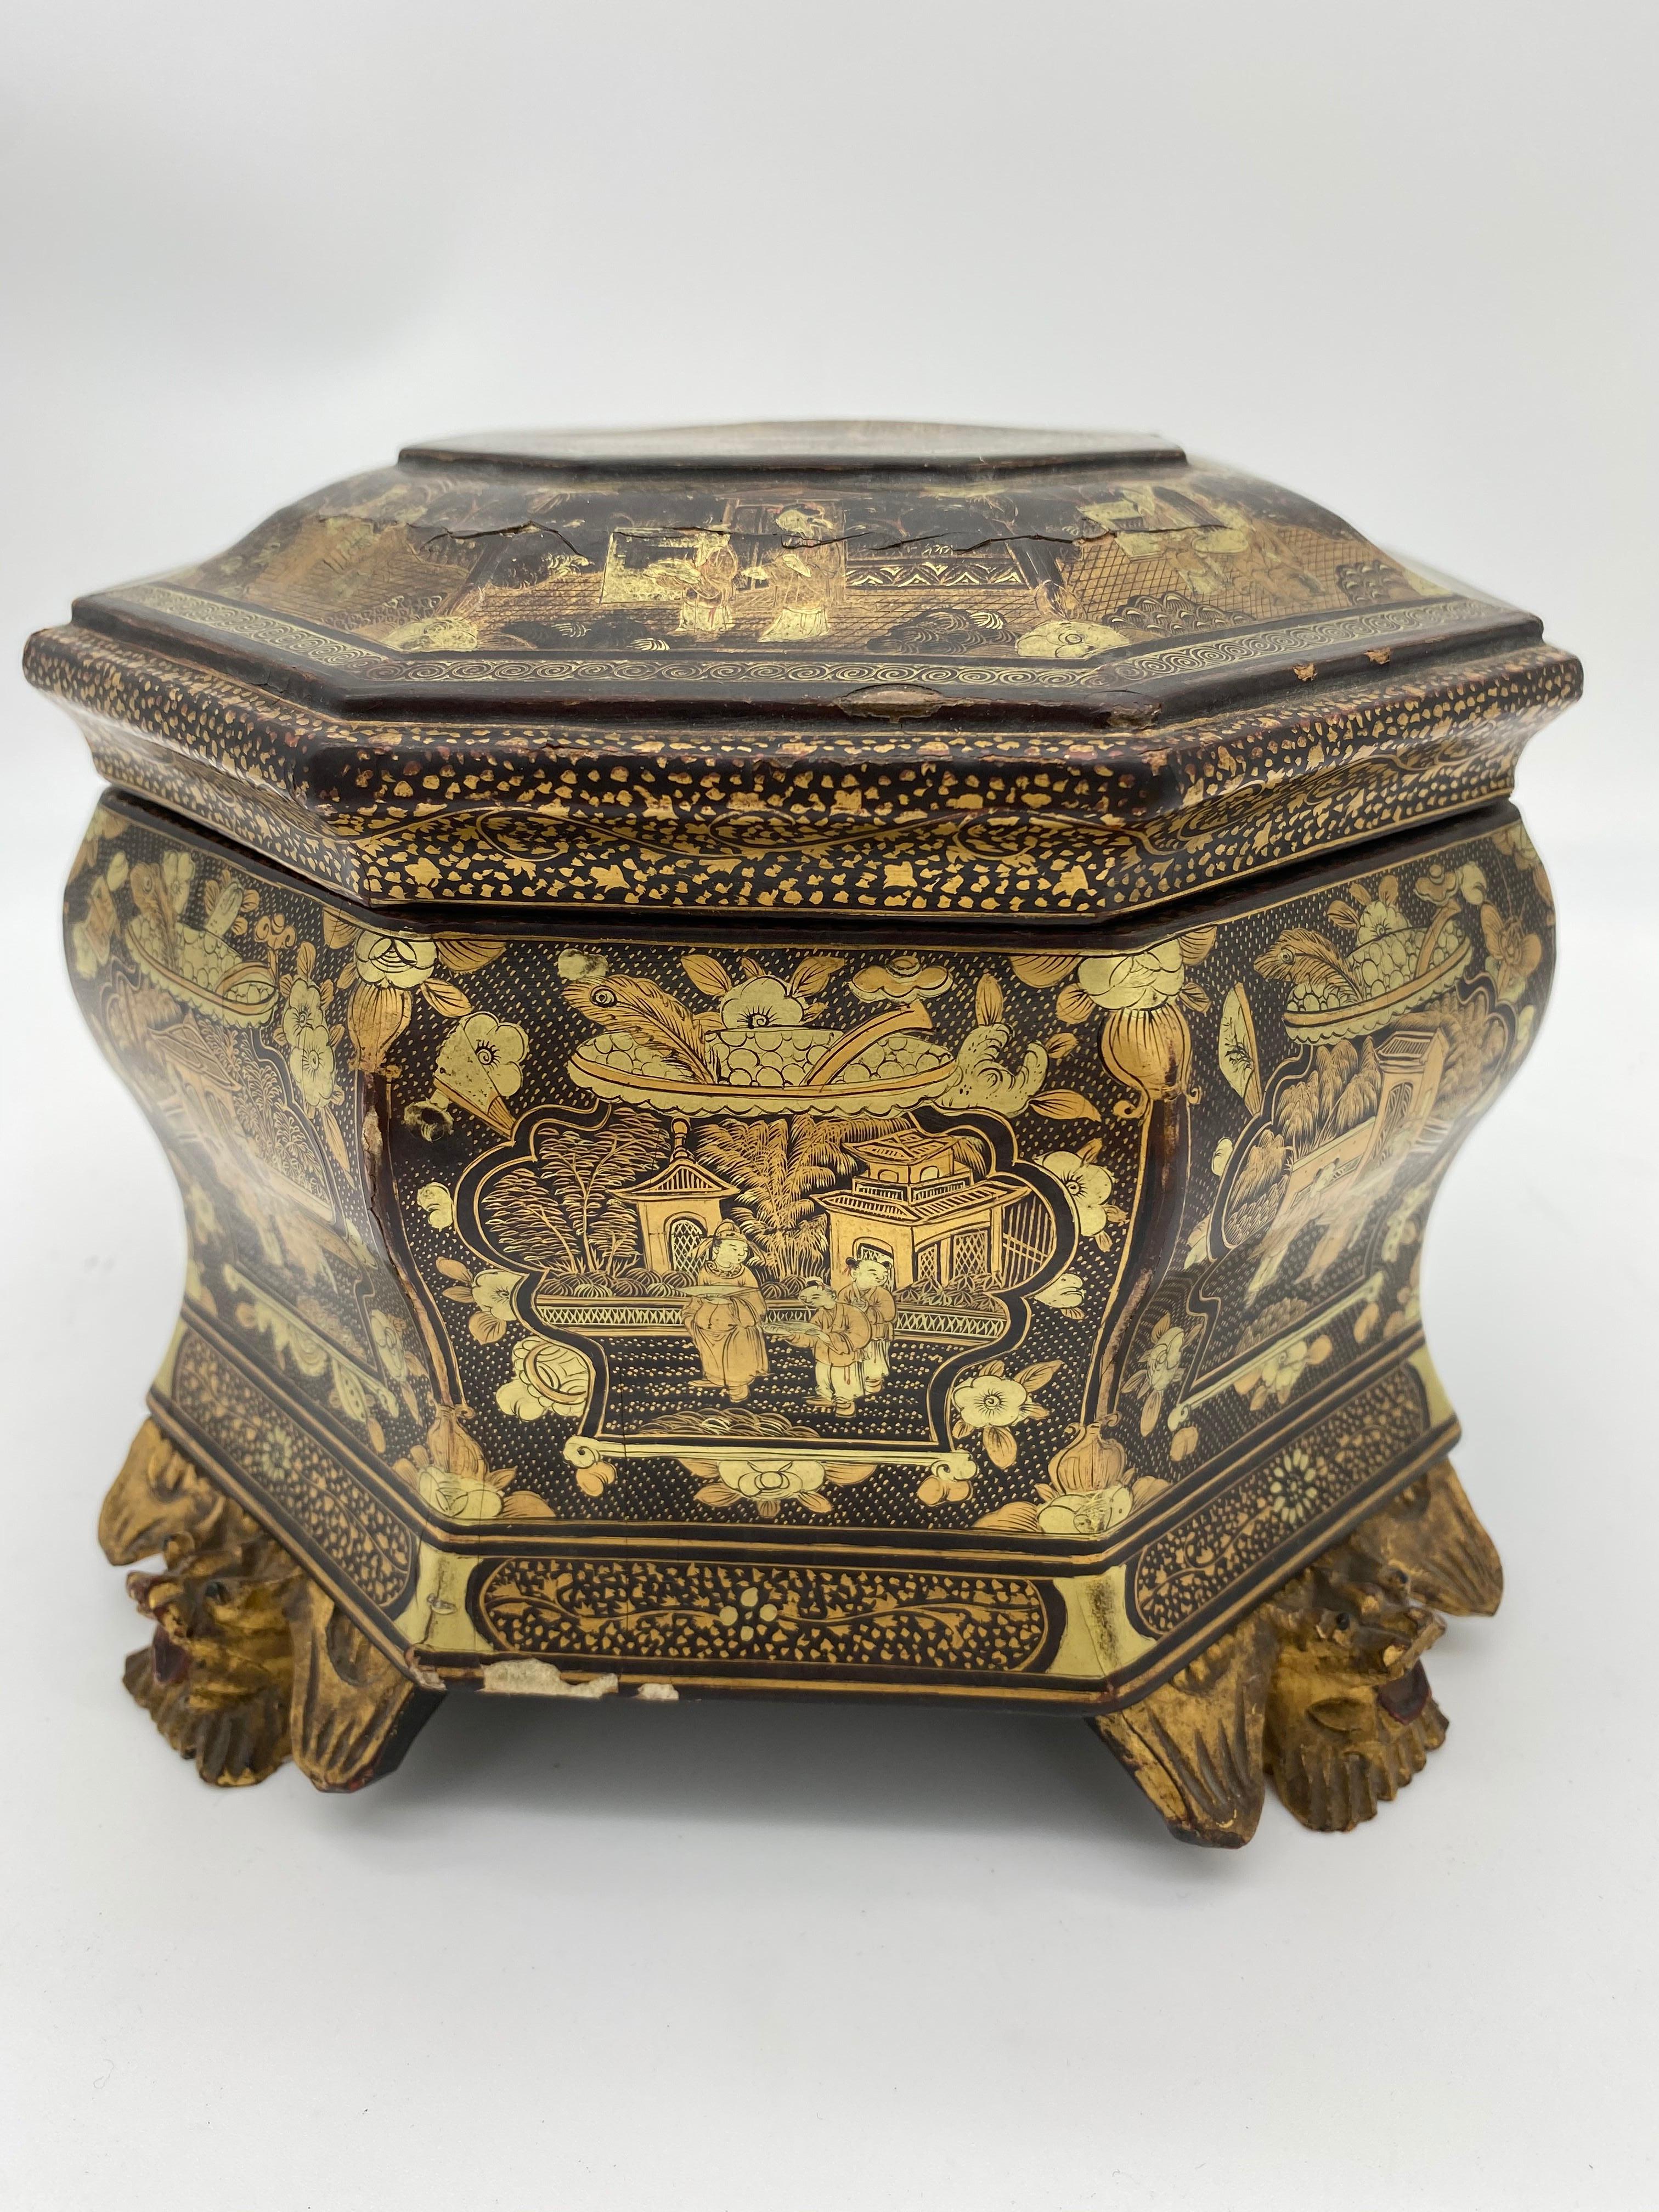 Hand-Carved 19th Century Hexagonal Black Lacquer Chinese Tea Caddy